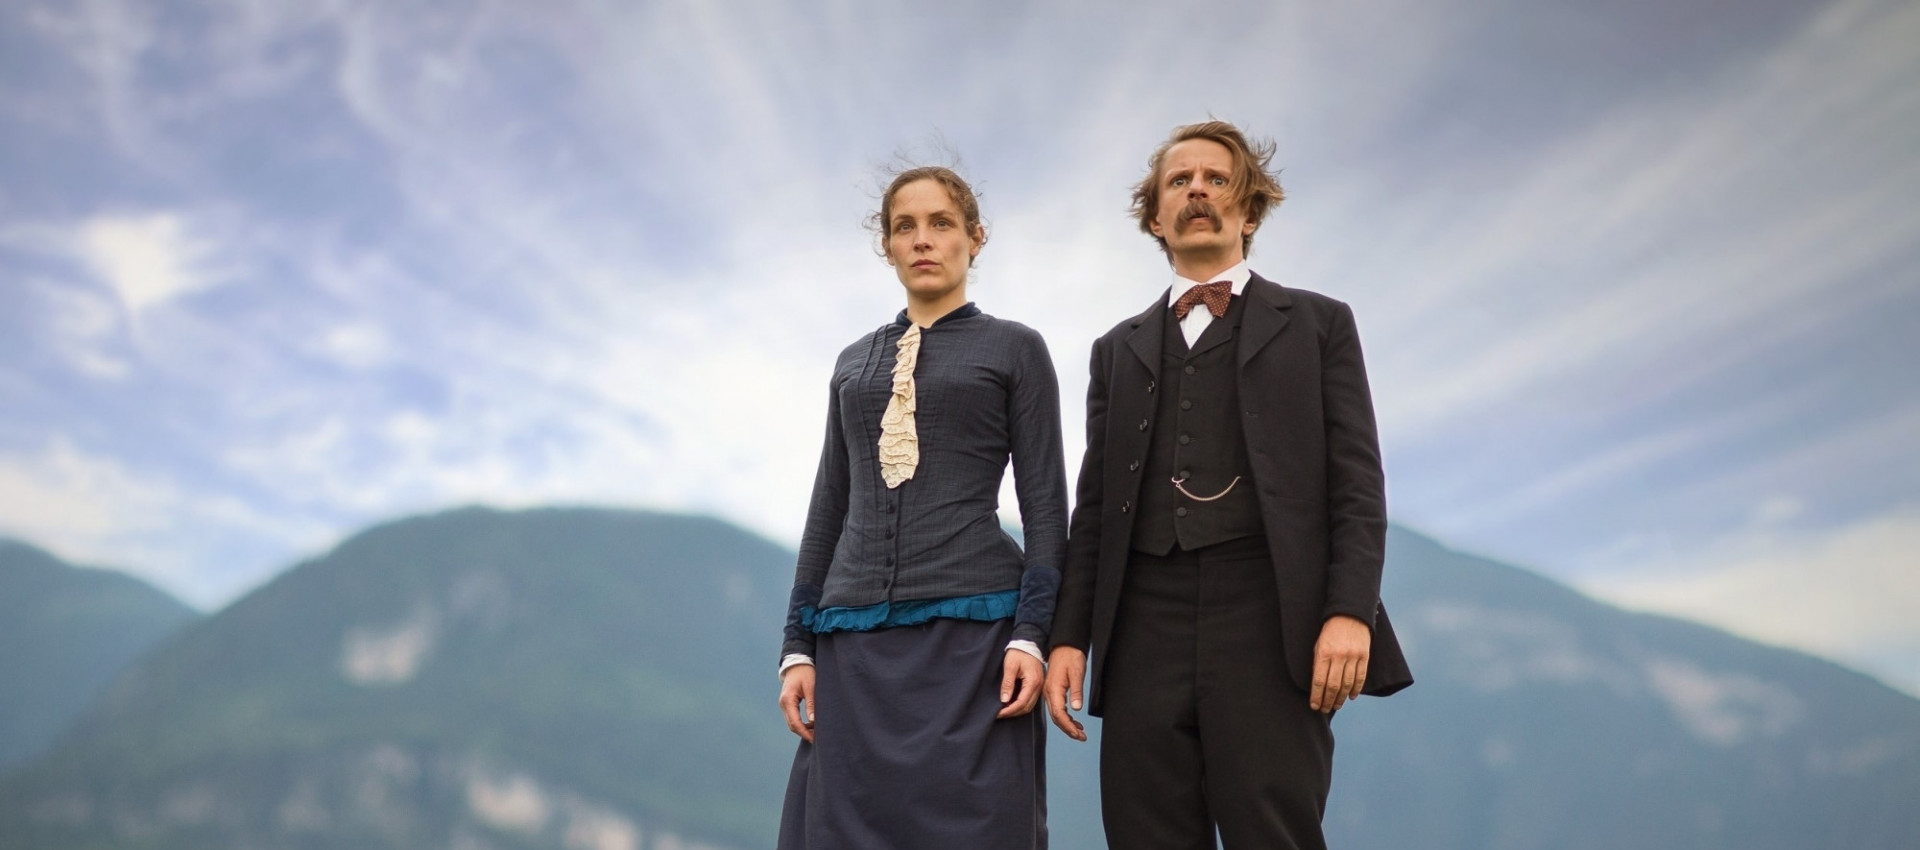 Lou Andreas-Salomé, The Audacity To Be Free, 2016